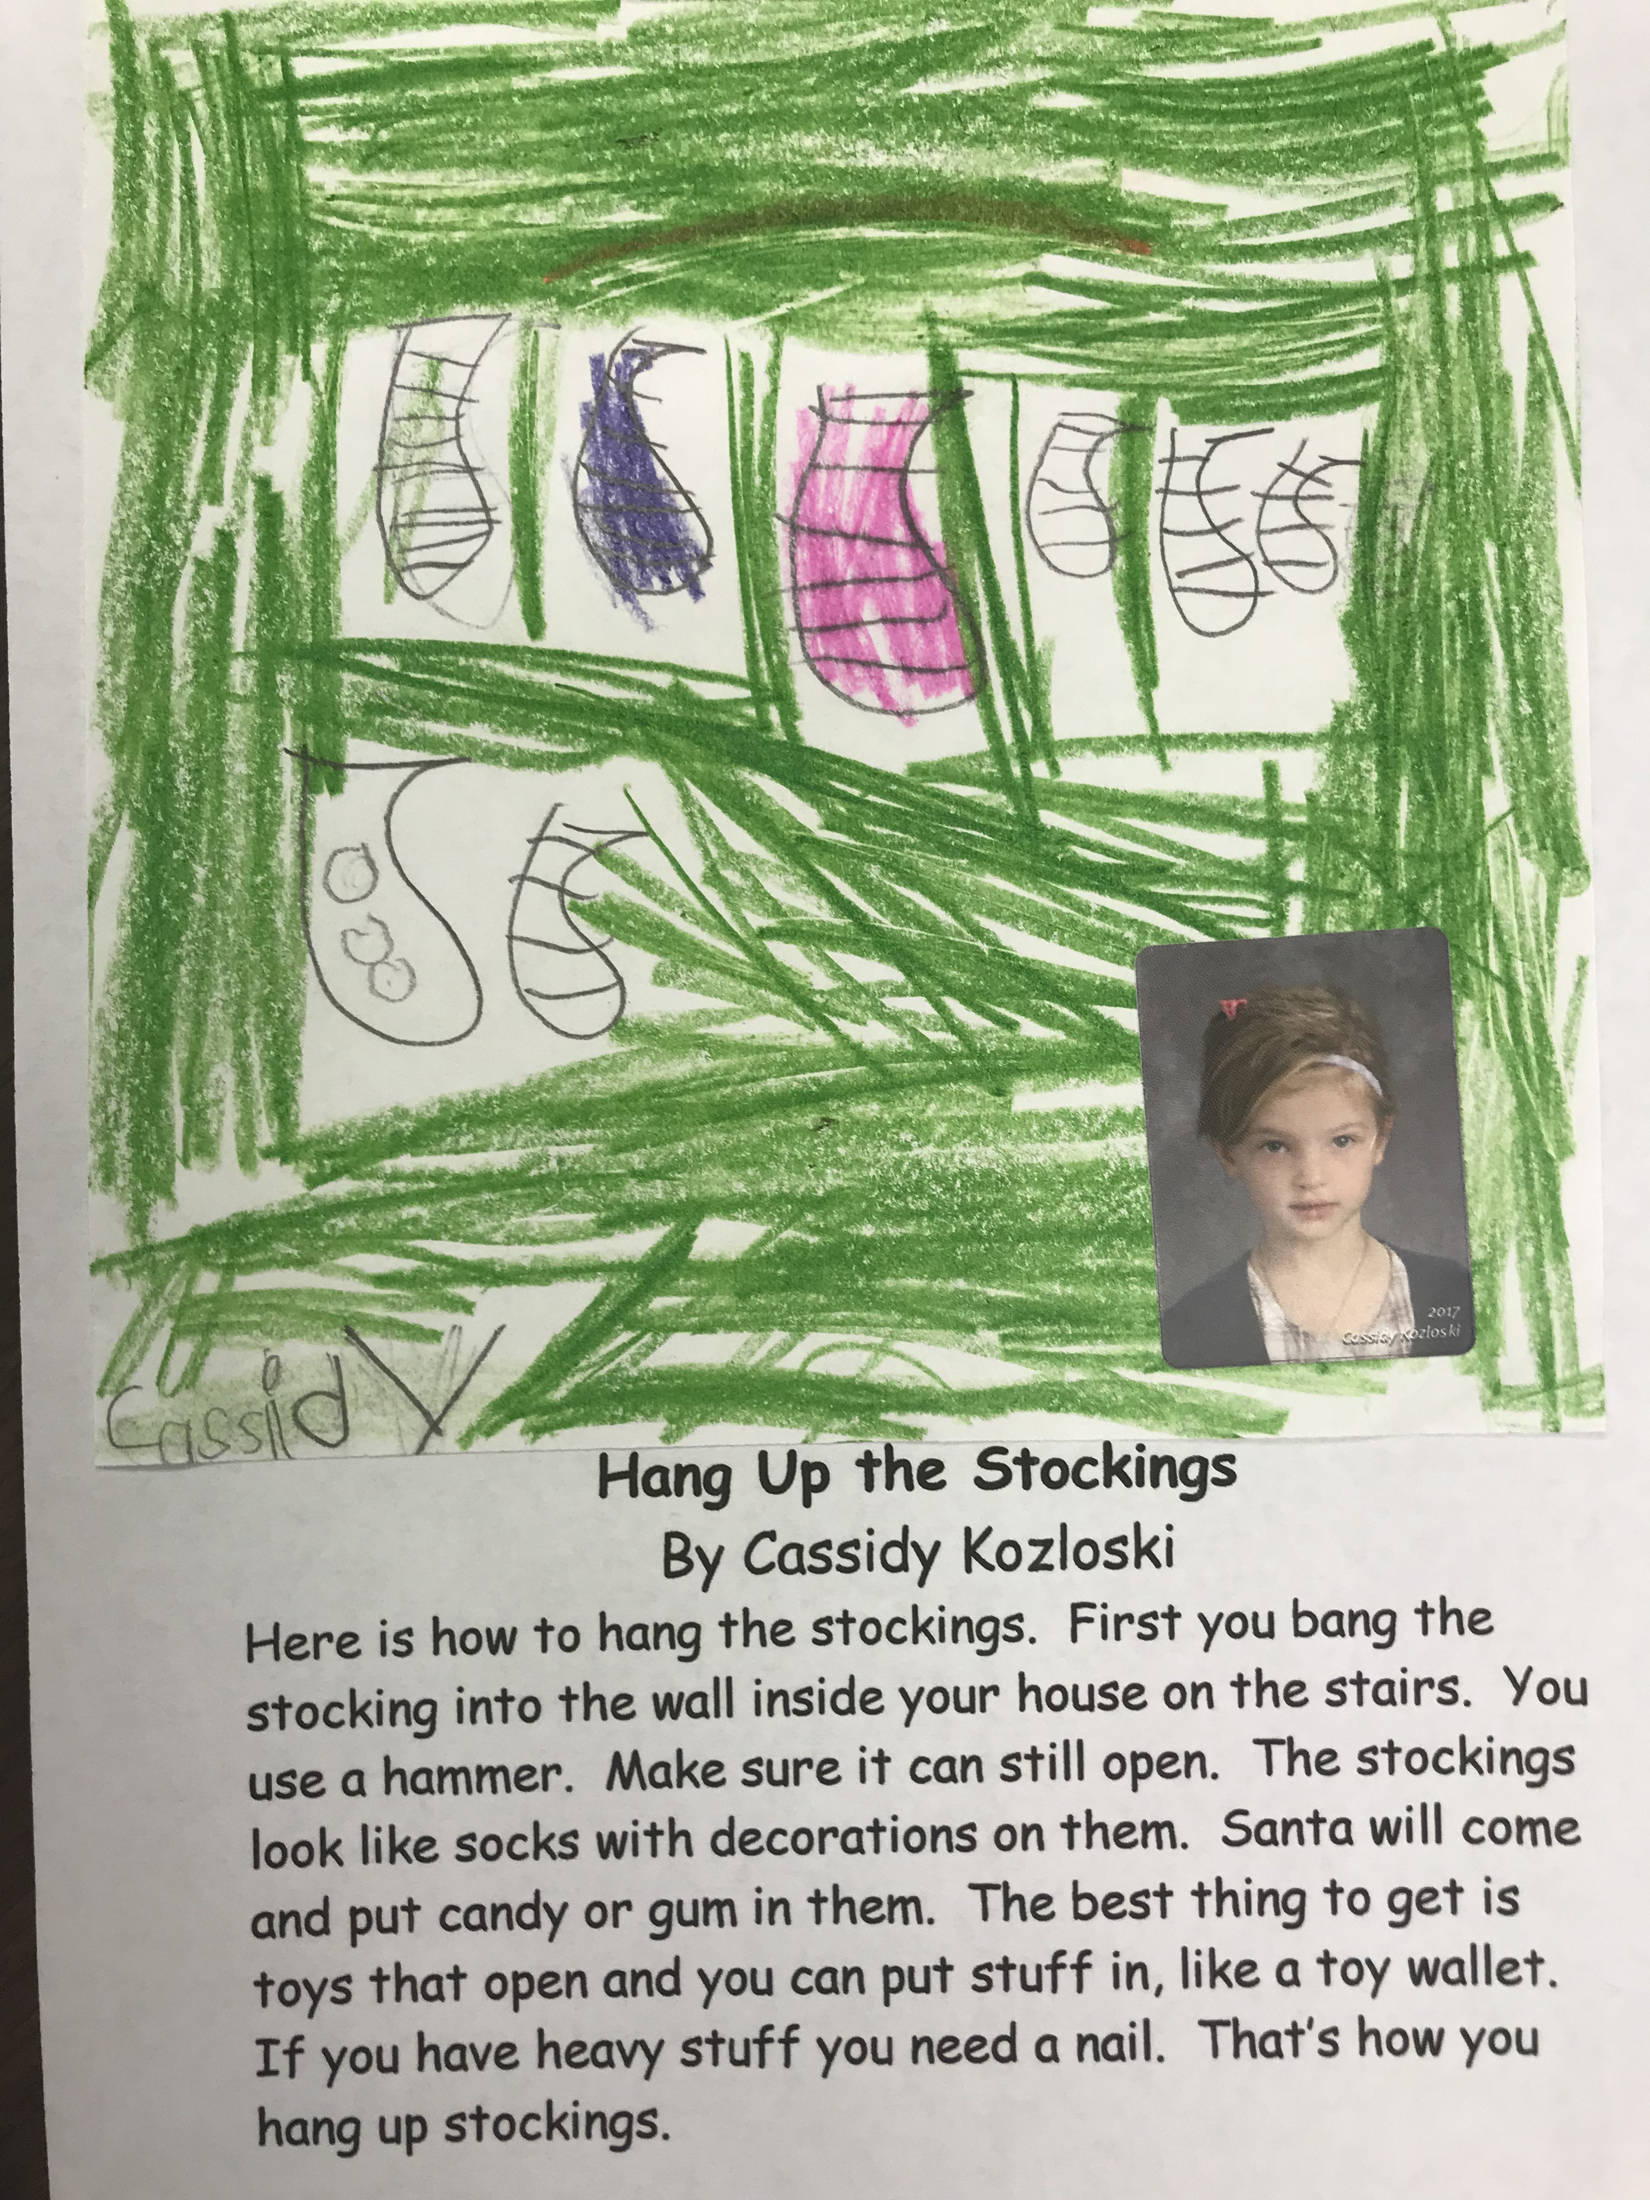 This holiday instruction made by Cassidy Kozloski is part of an 18-page “How to Get Ready for the Holidays” book created by the students of Jennifer Reinhart’s kindergarten class. (Photo courtesy Jennifer Reinhart)